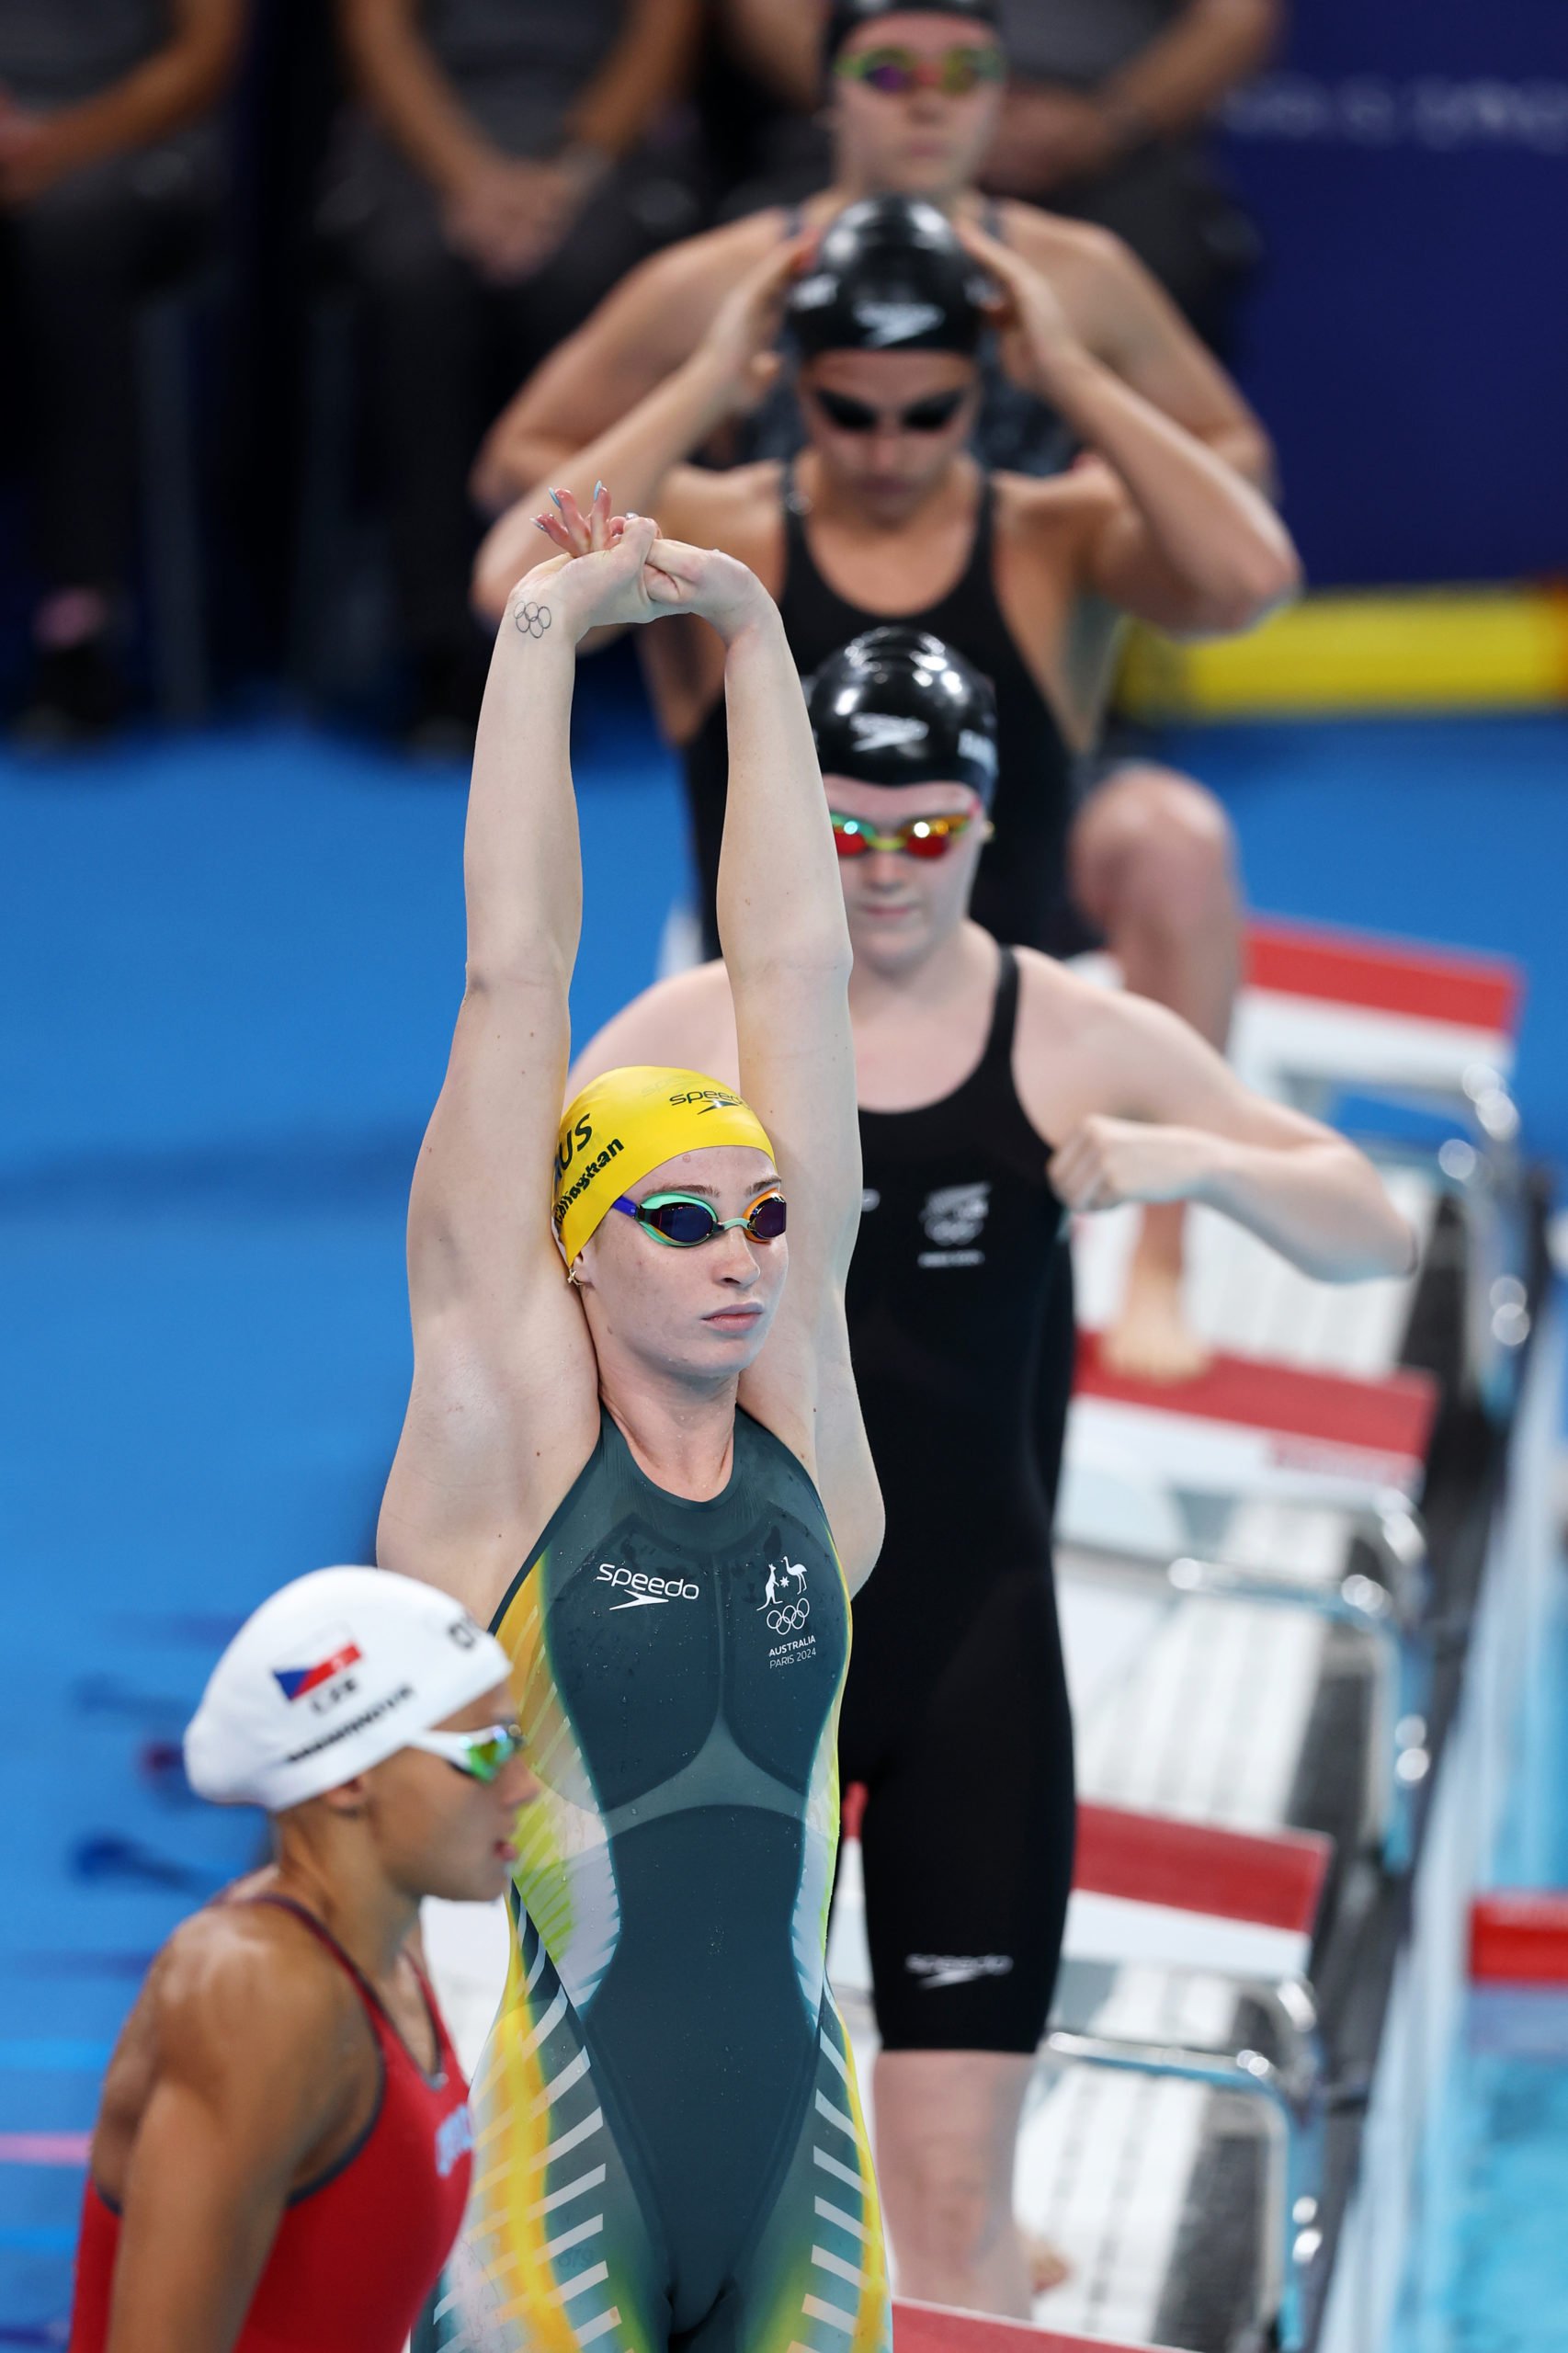 NANTERRE, FRANCE - JULY 28: Mollie O'Callaghan of Team Australia prepares to compete in the Women’s 200m Freestyle Heats on day two of the Olympic Games Paris 2024 at Paris La Defense Arena on July 28, 2024 in Nanterre, France. (Photo by Lintao Zhang/Getty Images)